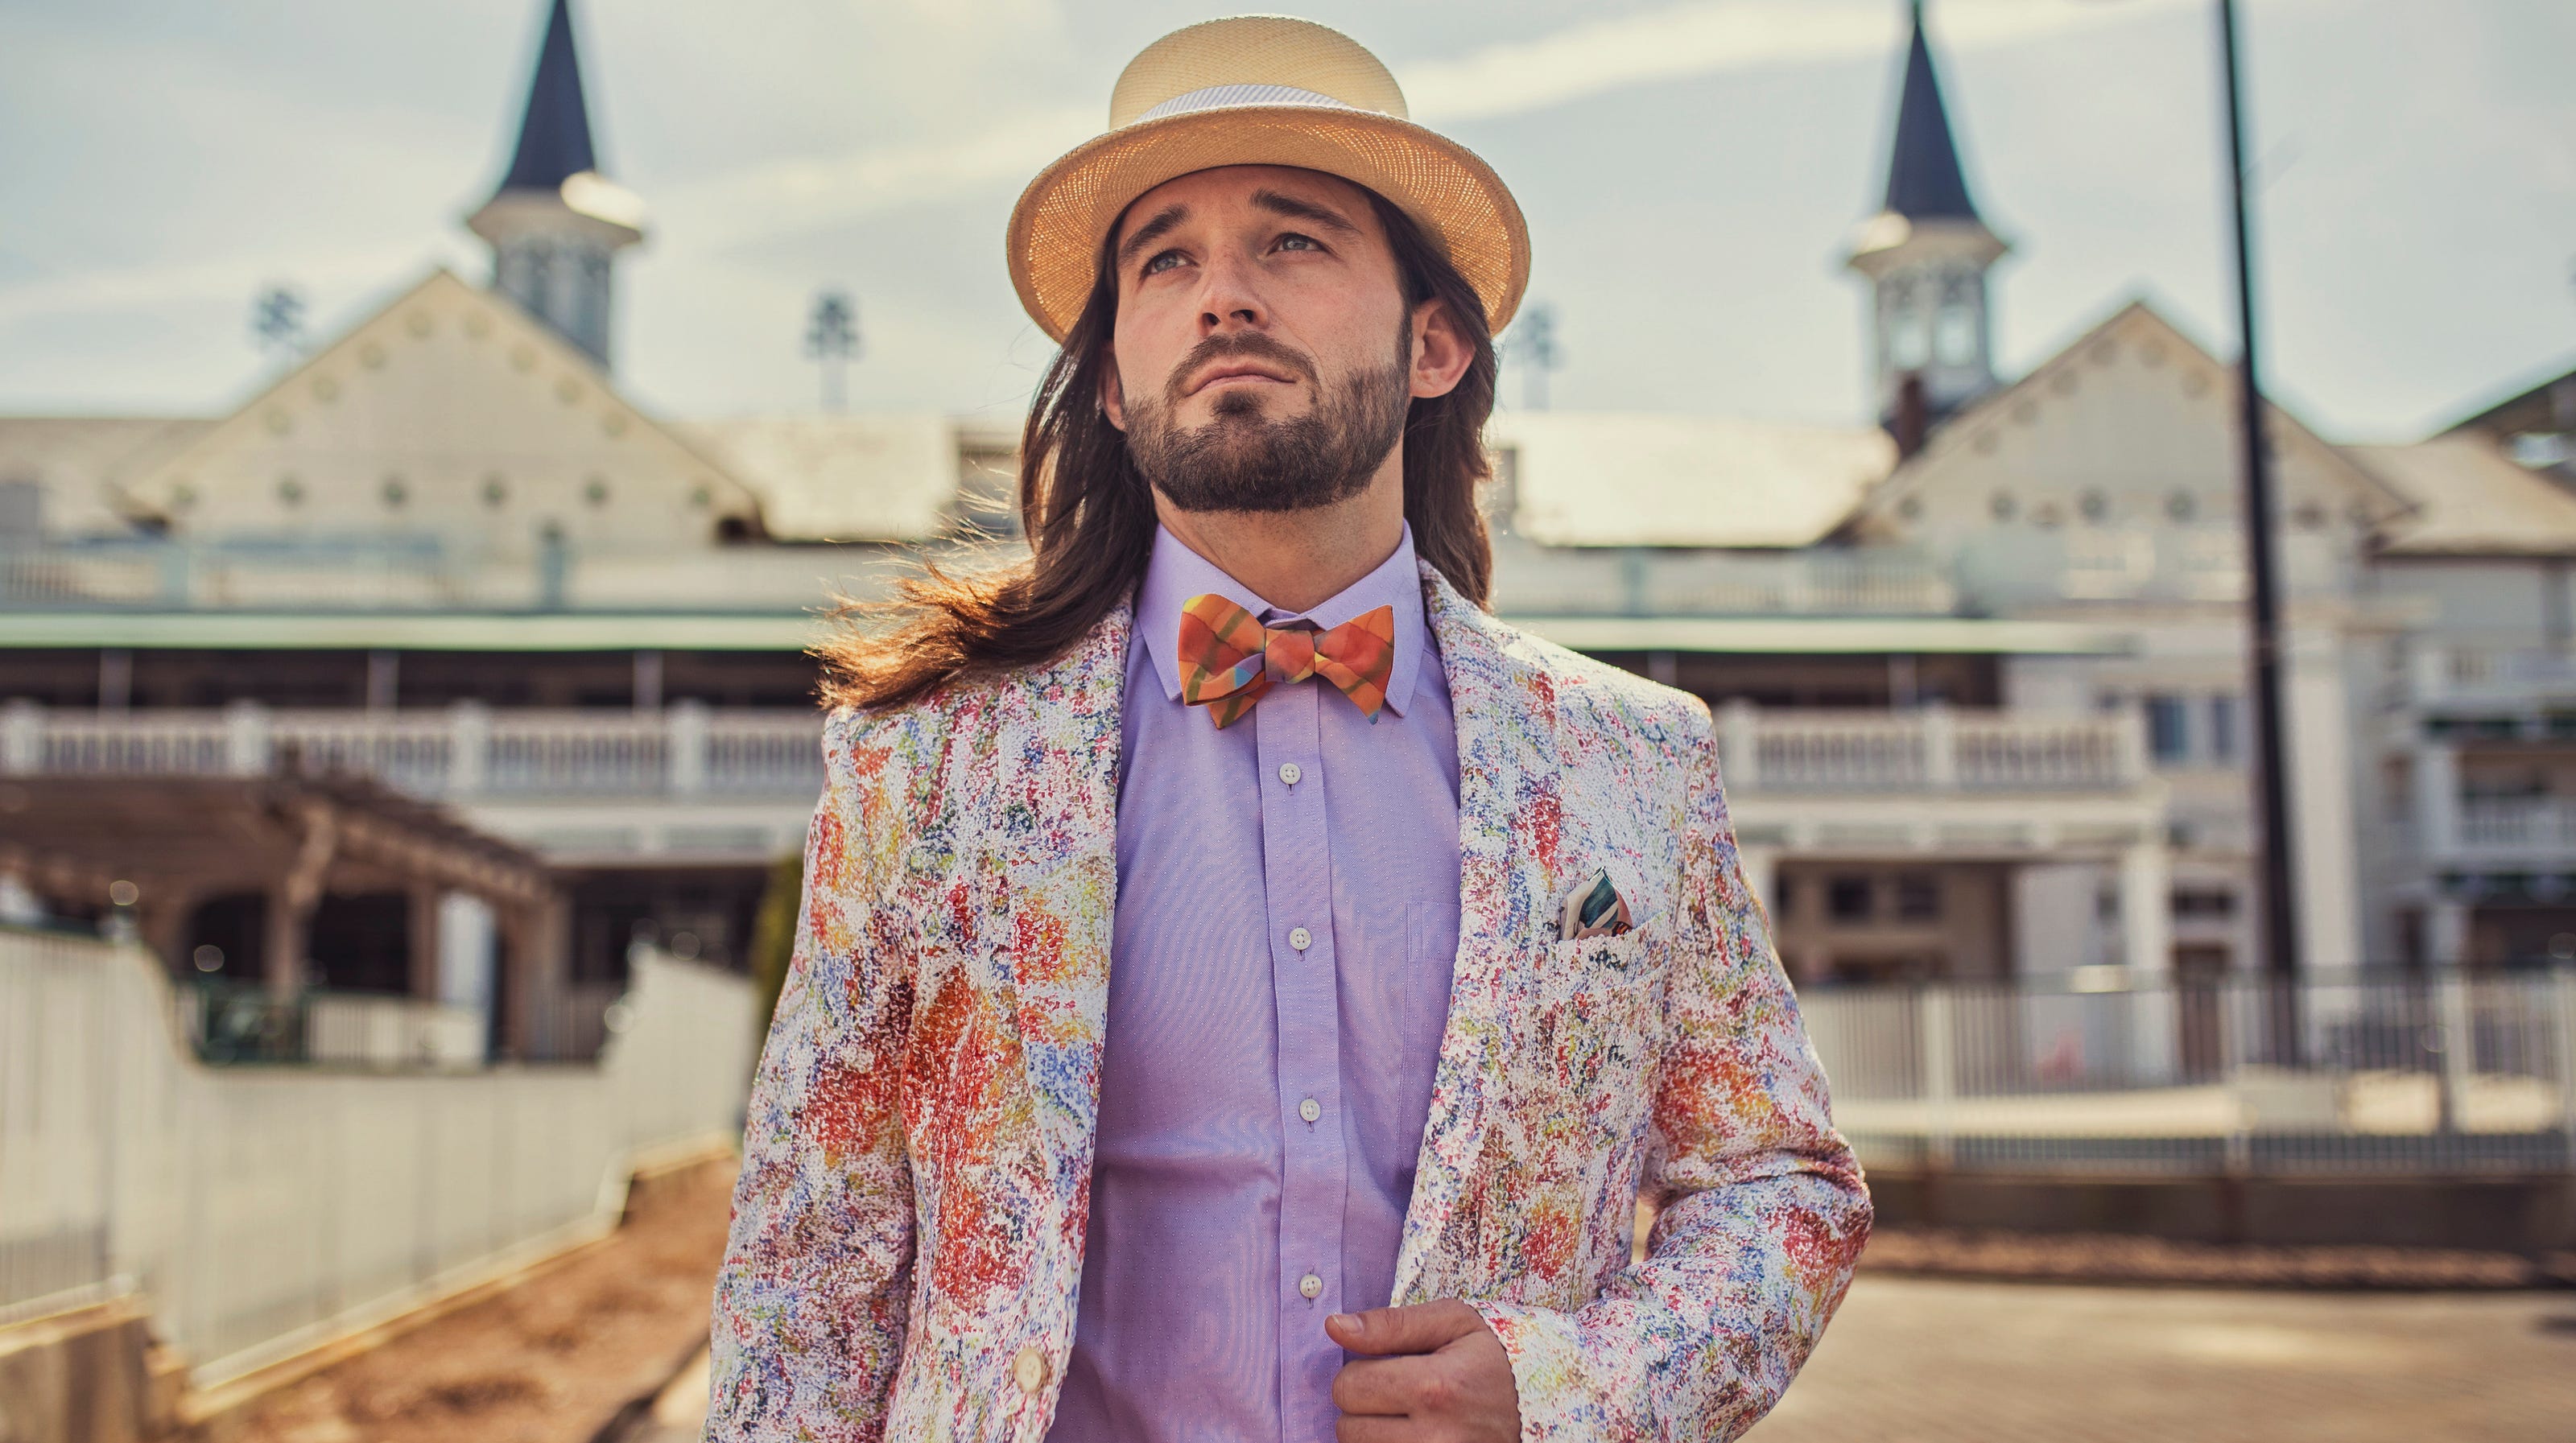 Kentucky Derby outfits for guys 2019 Men's attire, hats, bow ties